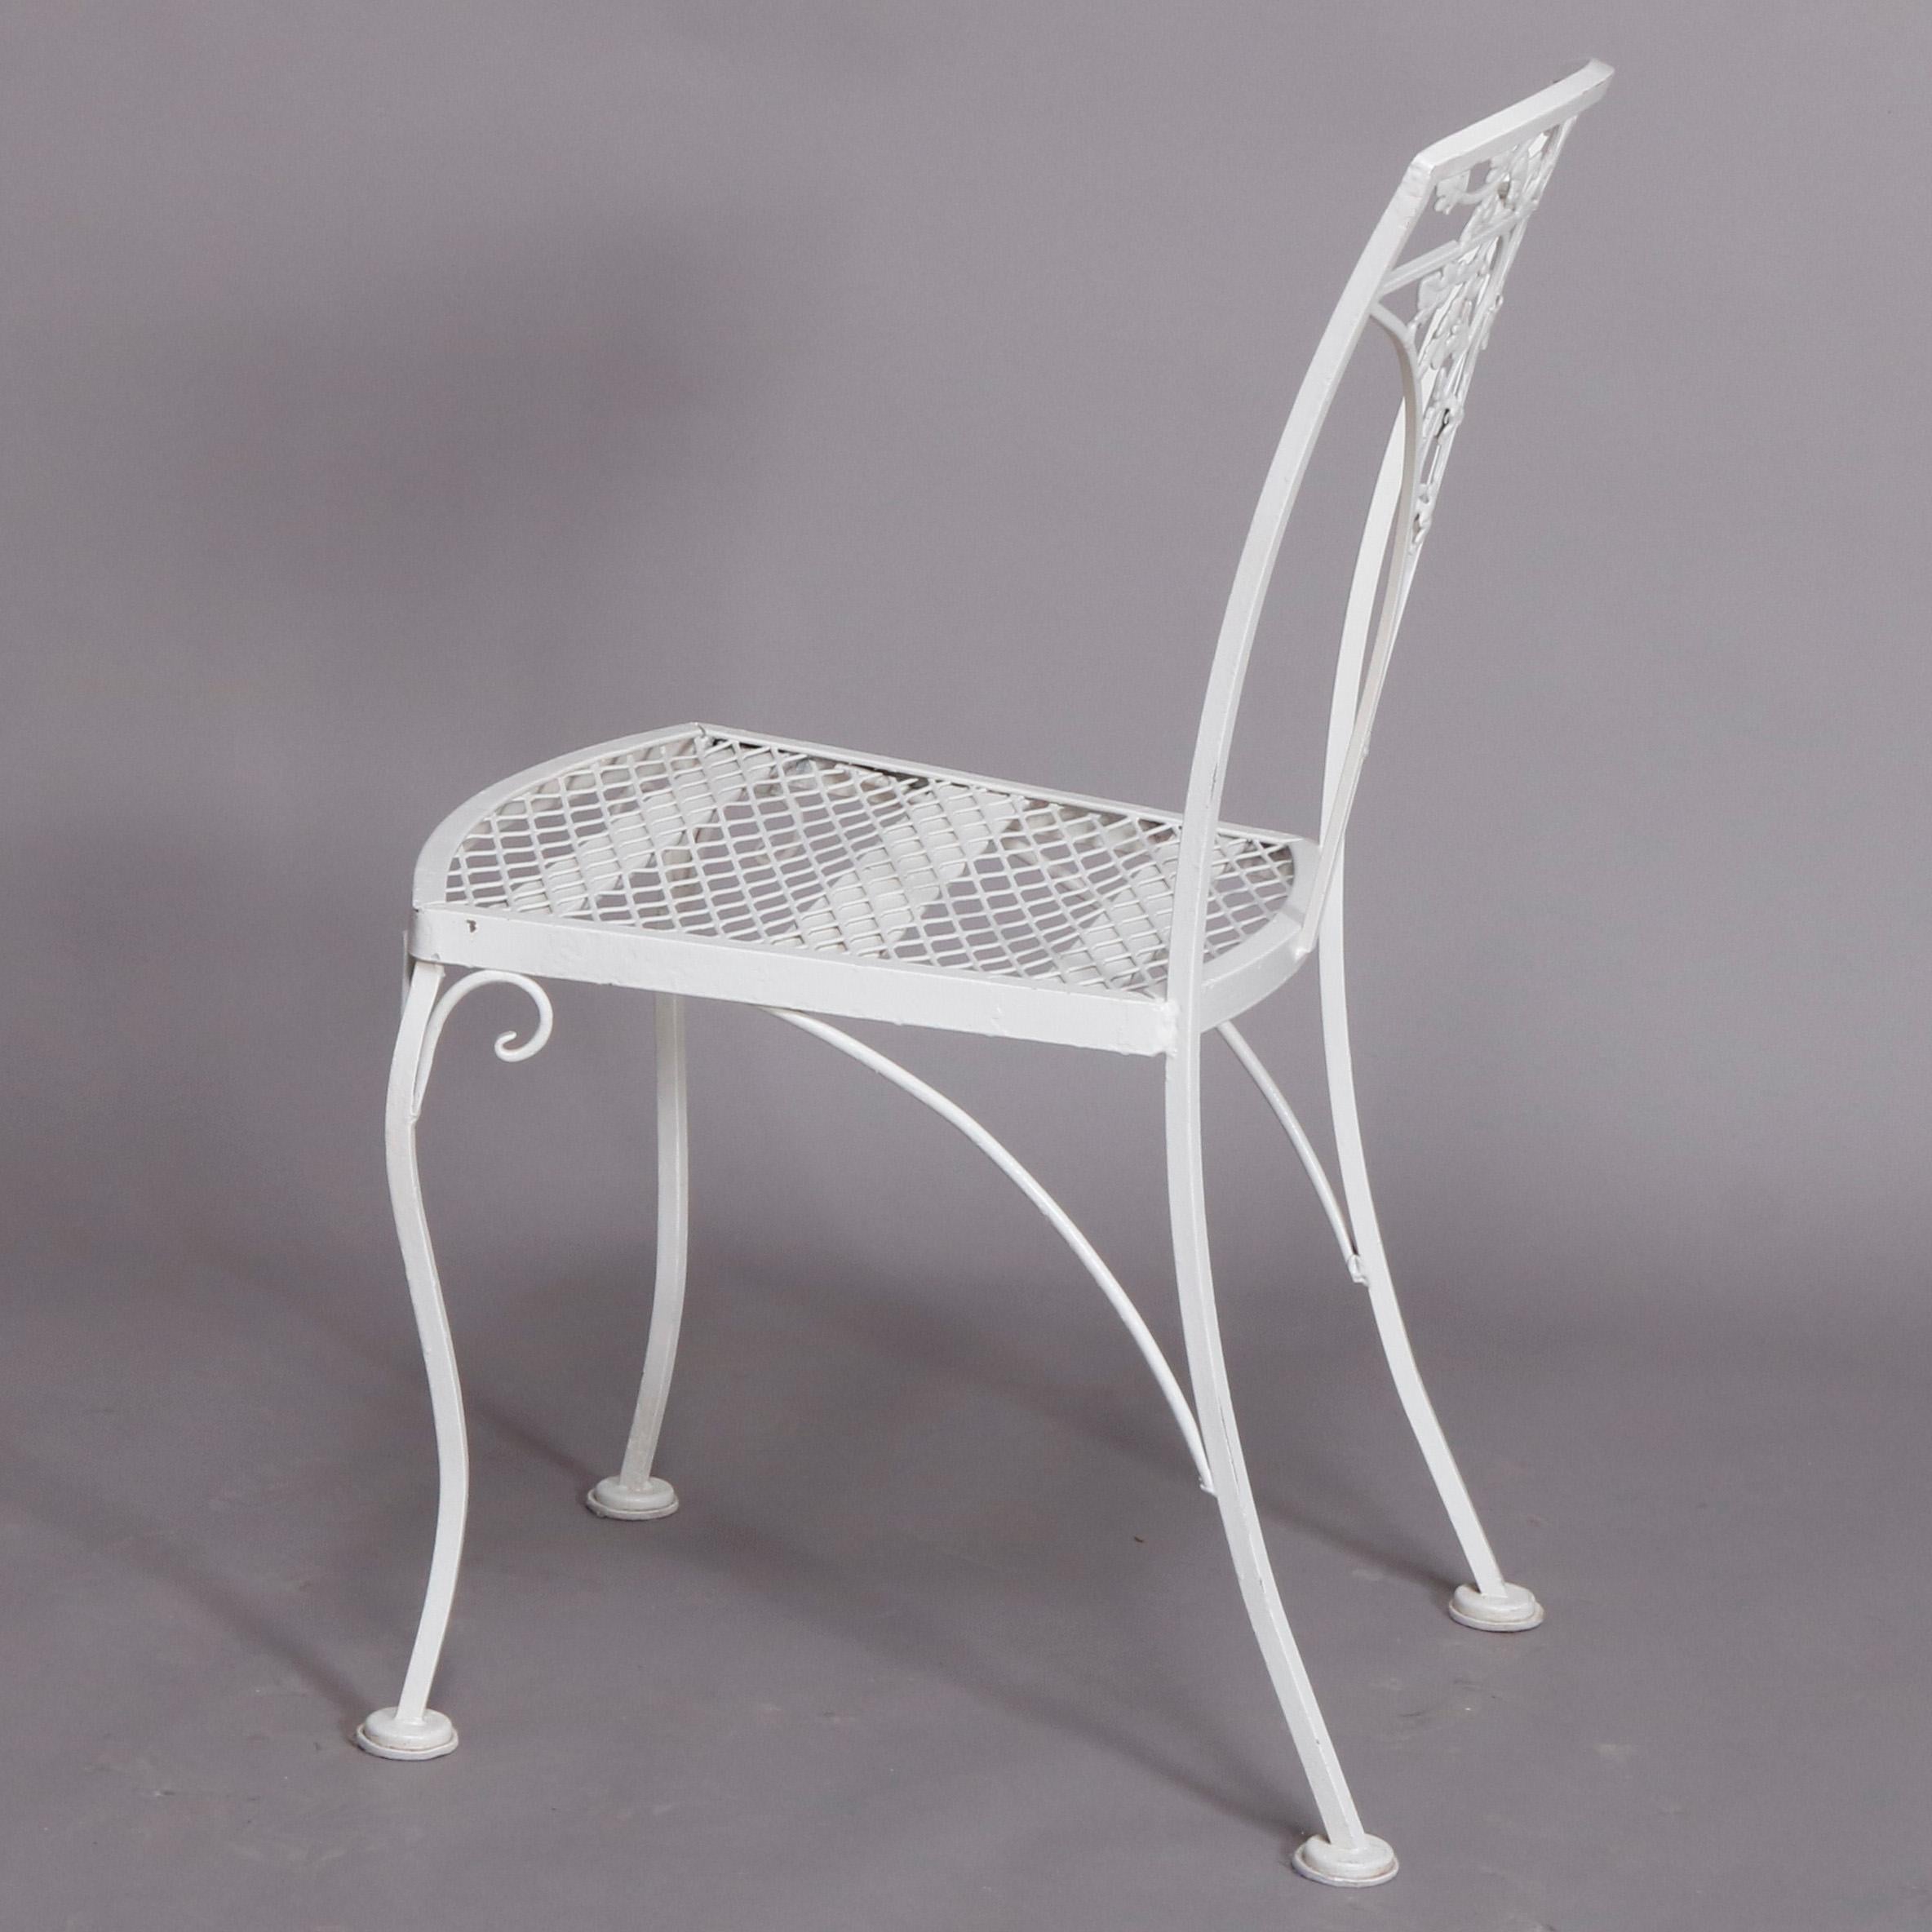 8 Victorian Style Wrought Iron Foliate Form White Painted Patio Chairs 1